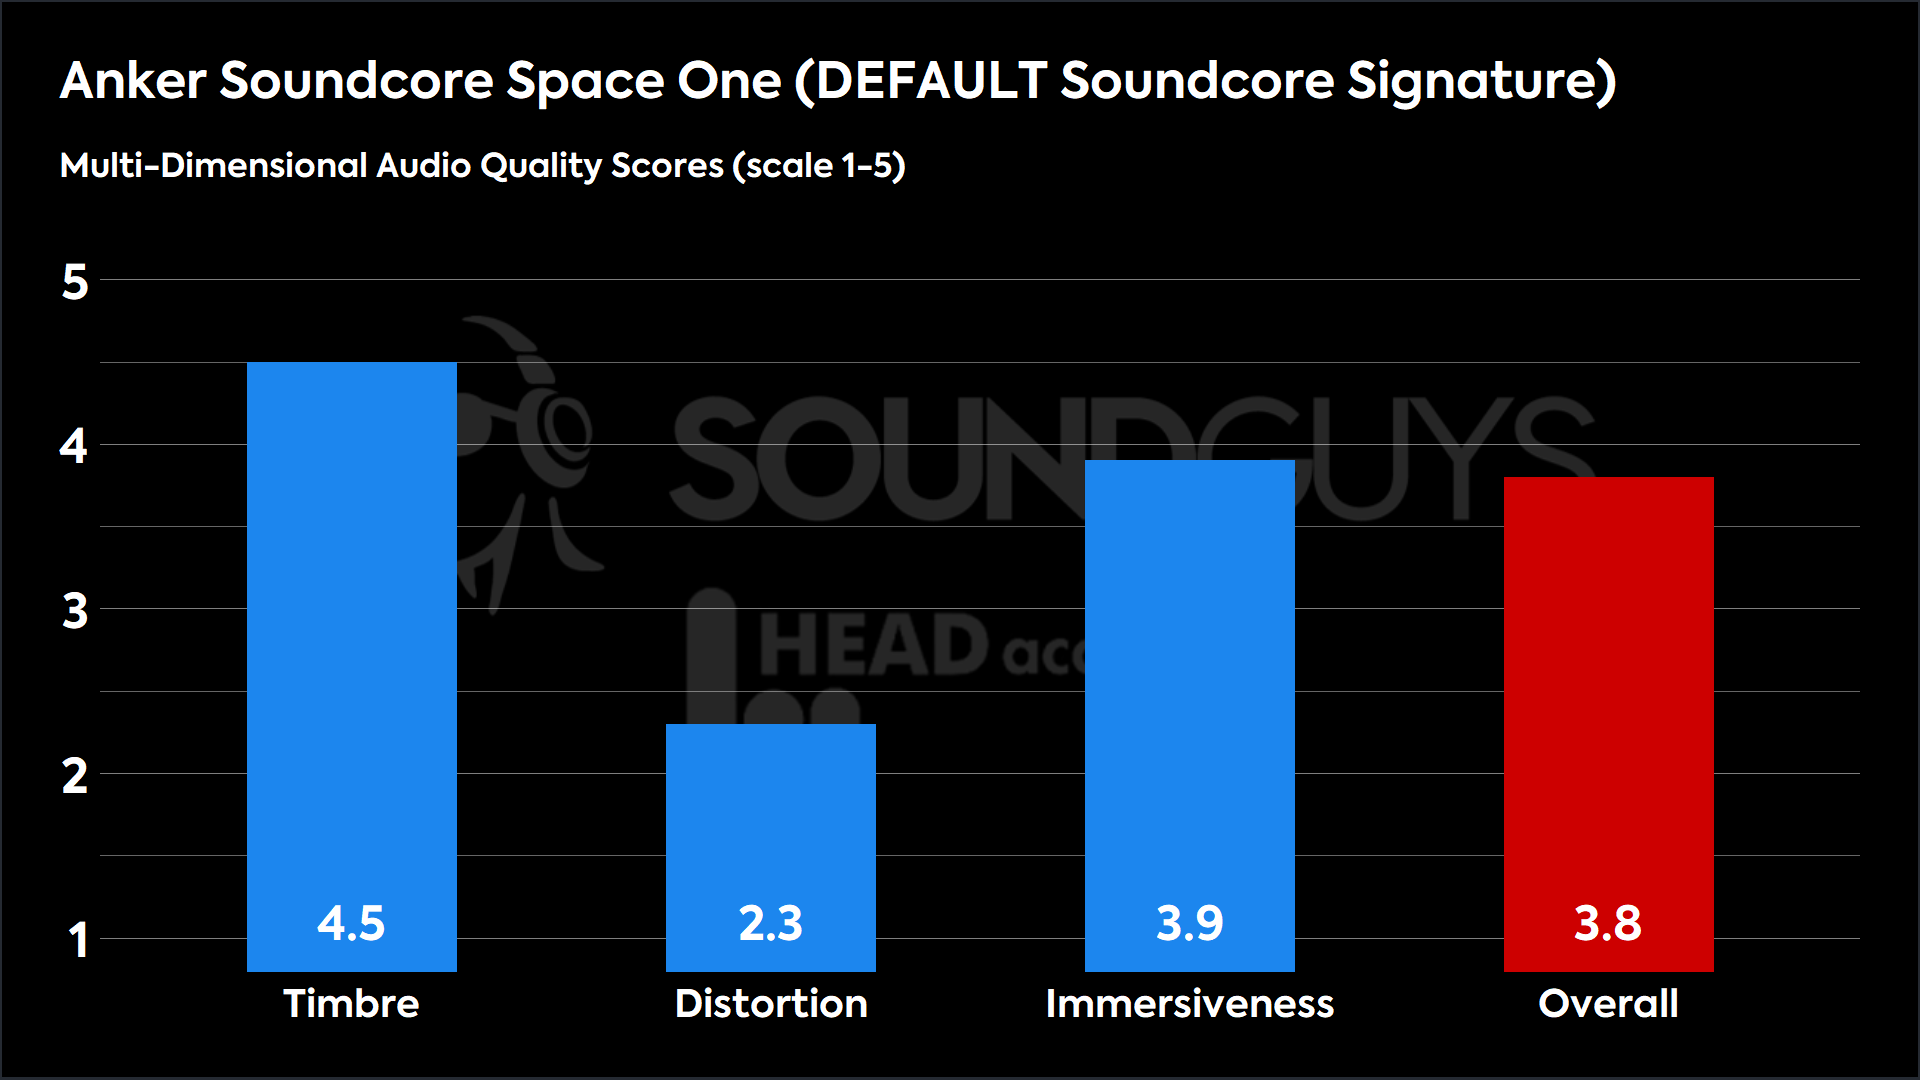 This chart shows the MDAQS results for the Anker Soundcore Space One in DEFAULT Soundcore Signature mode. The Timbre score is 4.5, The Distortion score is 2.3, the Immersiveness score is 3.9, and the Overall Score is 3.8).